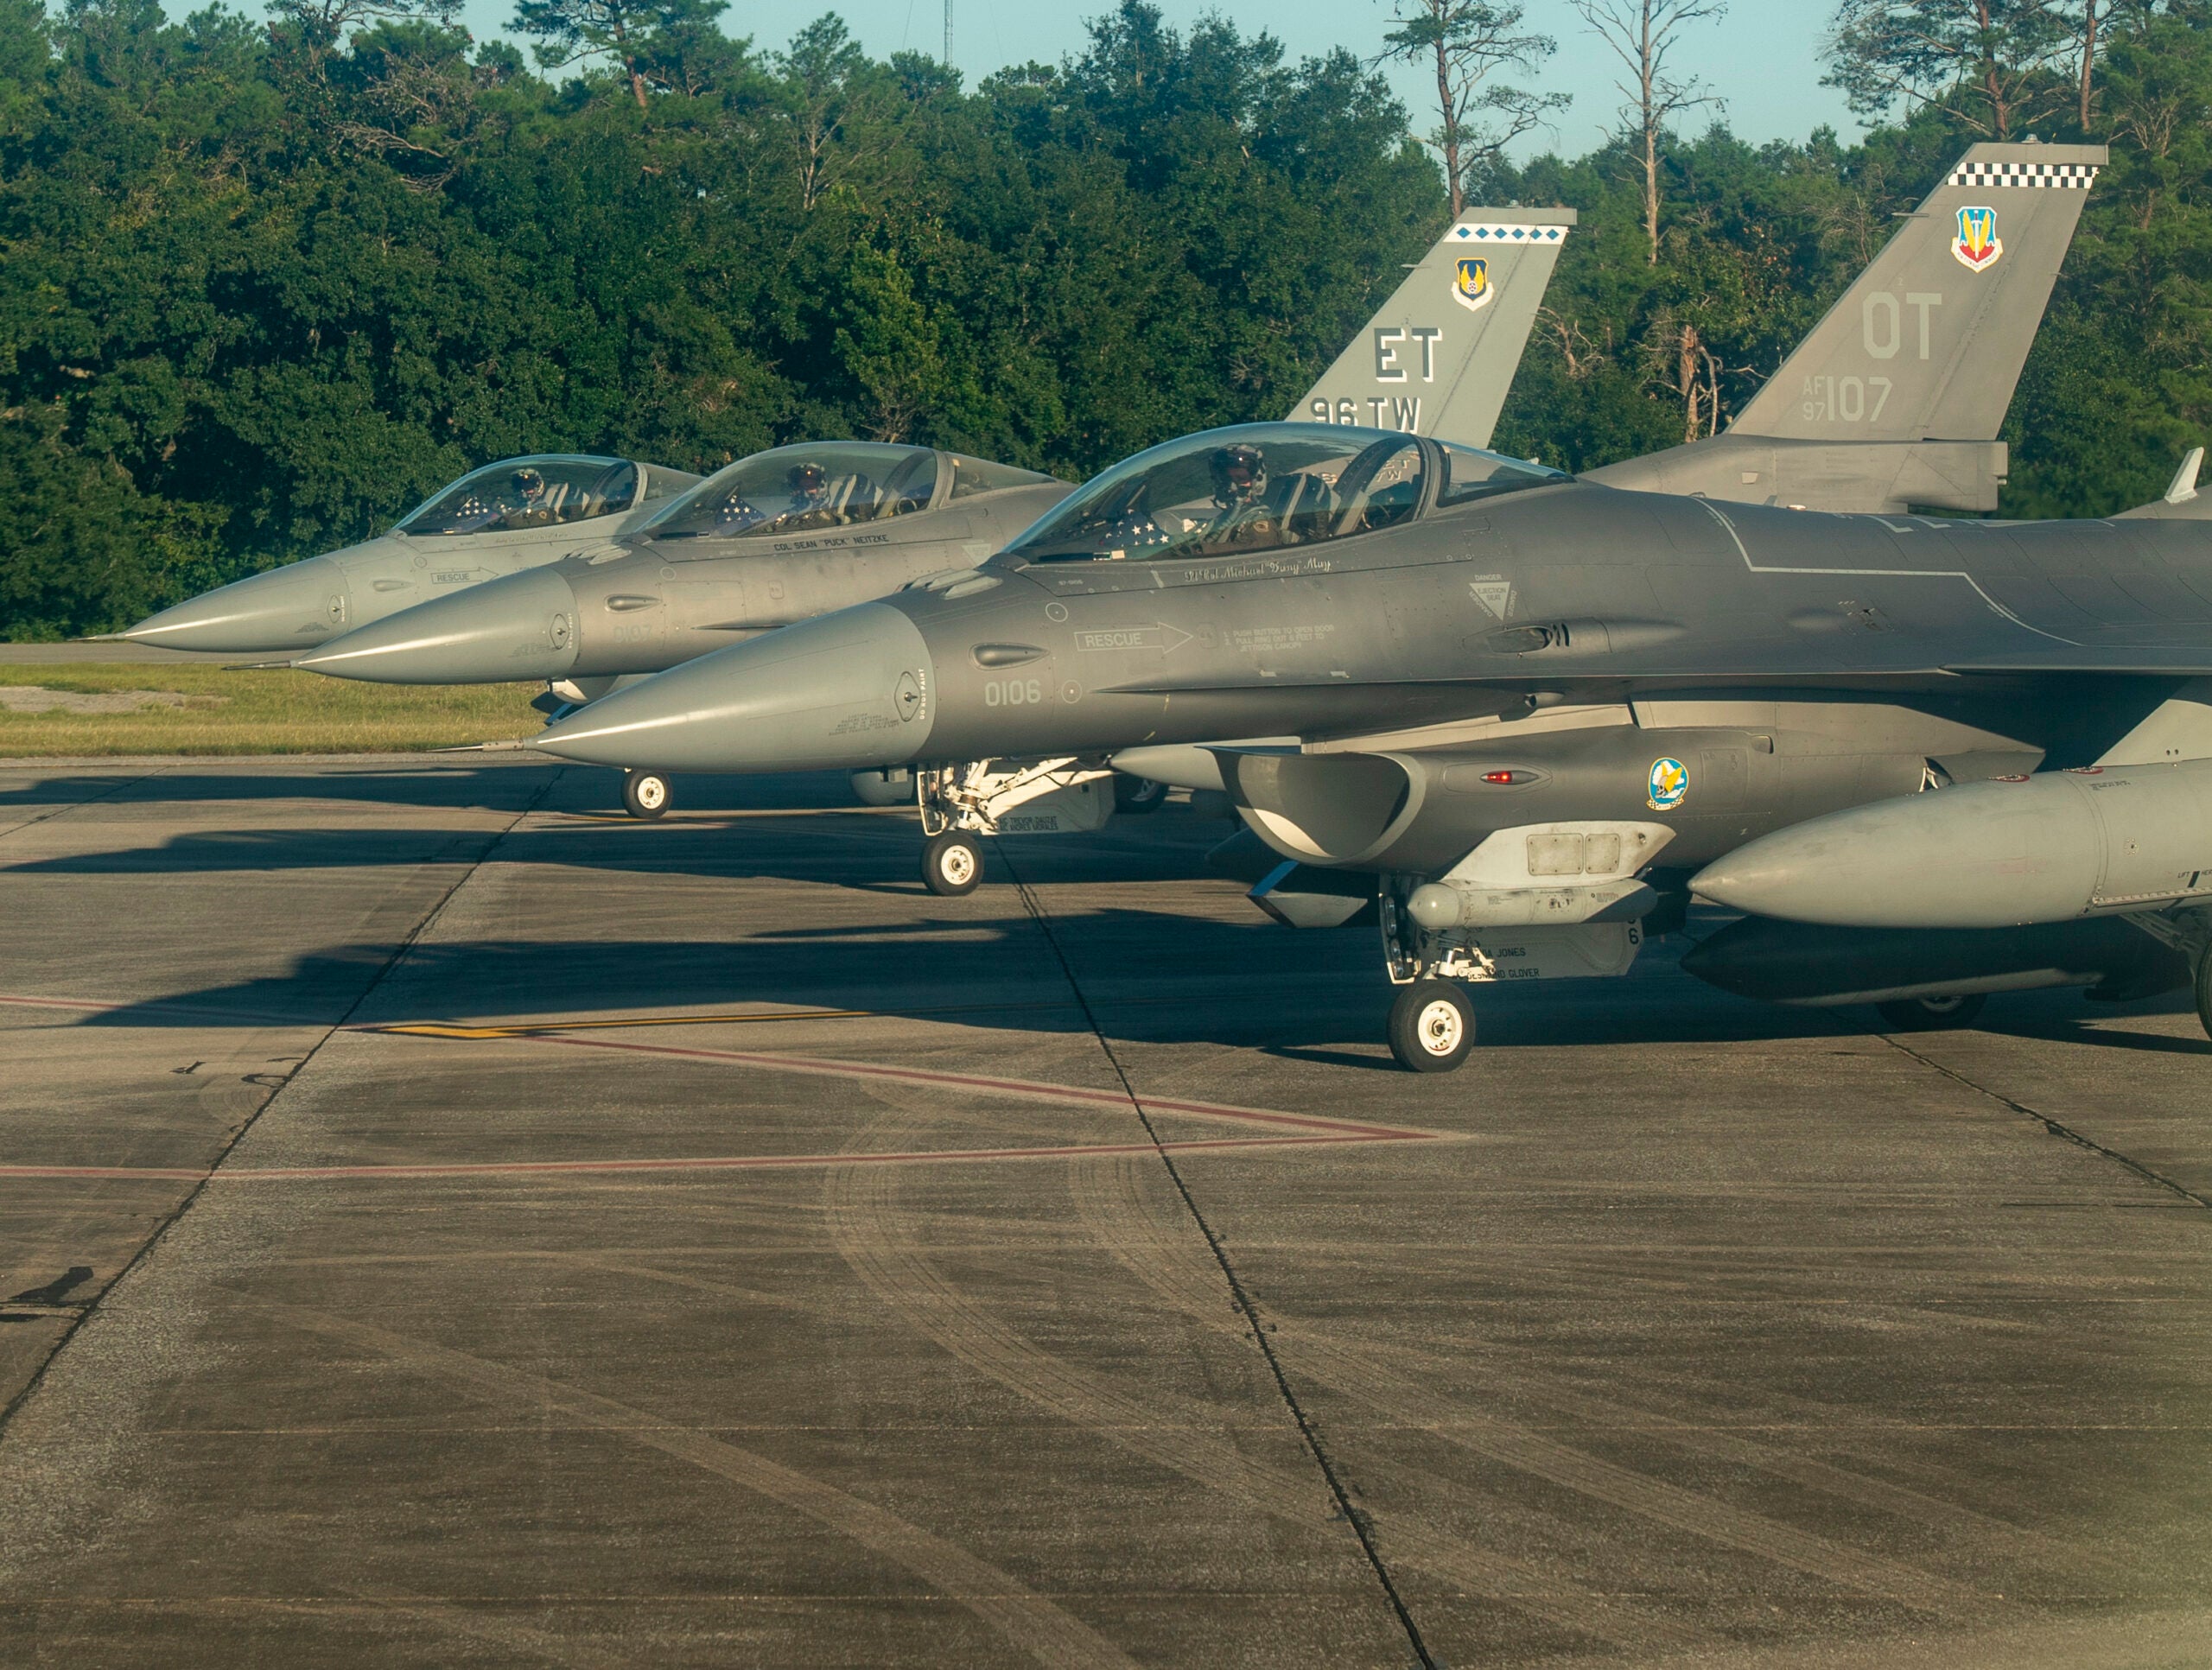 Three F-16s from Eglin Air Force Base prepare for takeoff before flying over two football games at Niceville, Fla. And Crestview, Fl., Sept. 24, 2021.  The Okaloosa County Schools held a Prisoner of War/Missing In Action remembrance ceremony prior to kick-off. (U.S. Air Force photo by Master Sgt. Tristan McIntire)